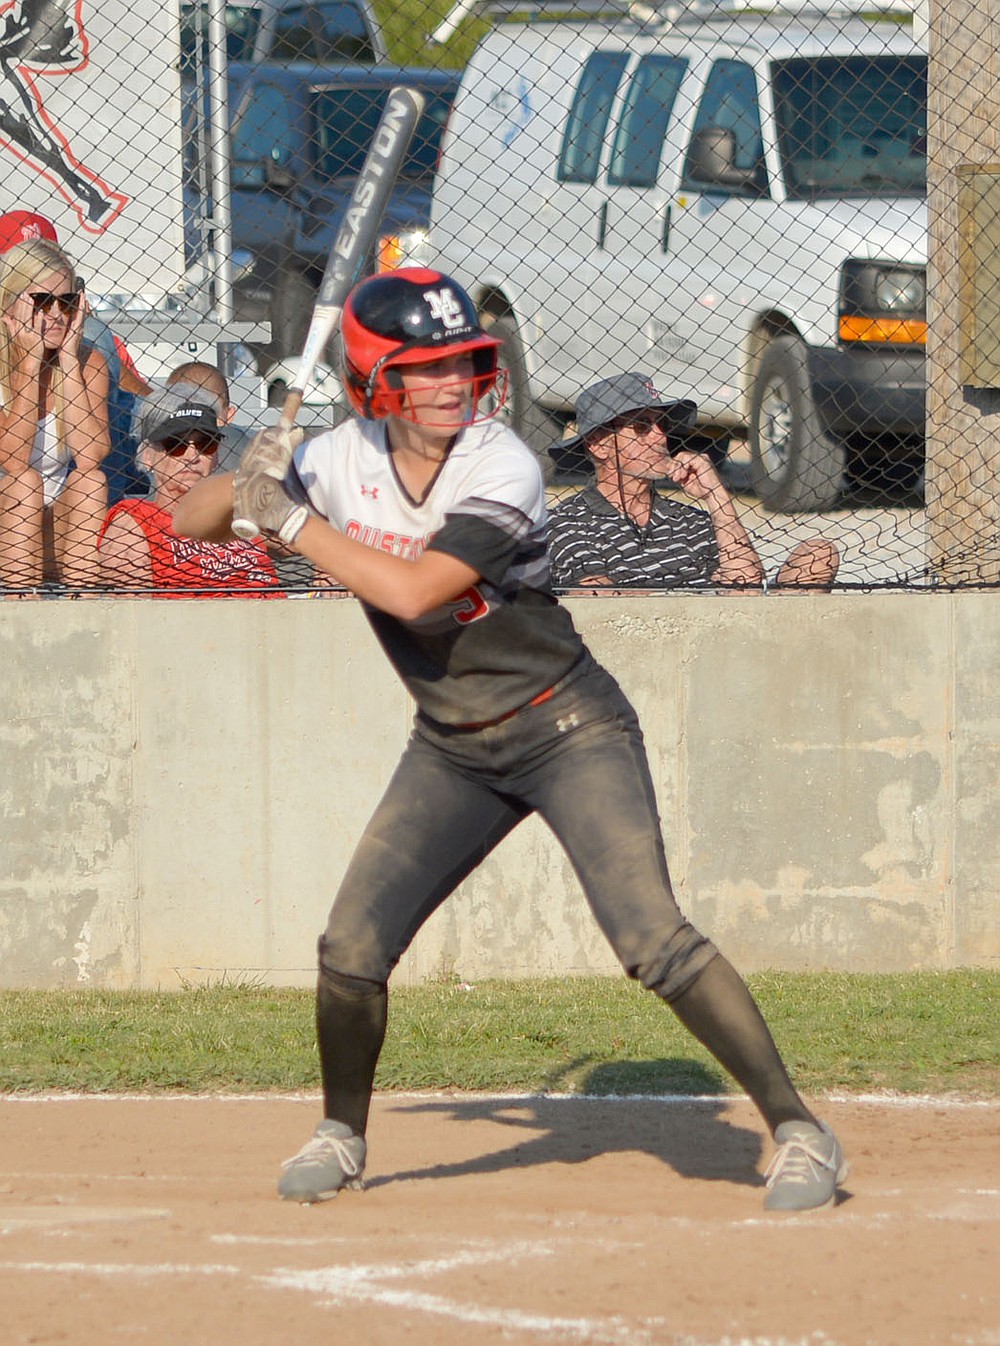 Al Gaspeny/Special to the McDonald County Press
The Lady Mustangs' Melanie Gillming waits for the pitch before hitting a single during Tuesday's home game against Reeds Spring. McDonald County won 13-1 in five innings, improving to 4-1.